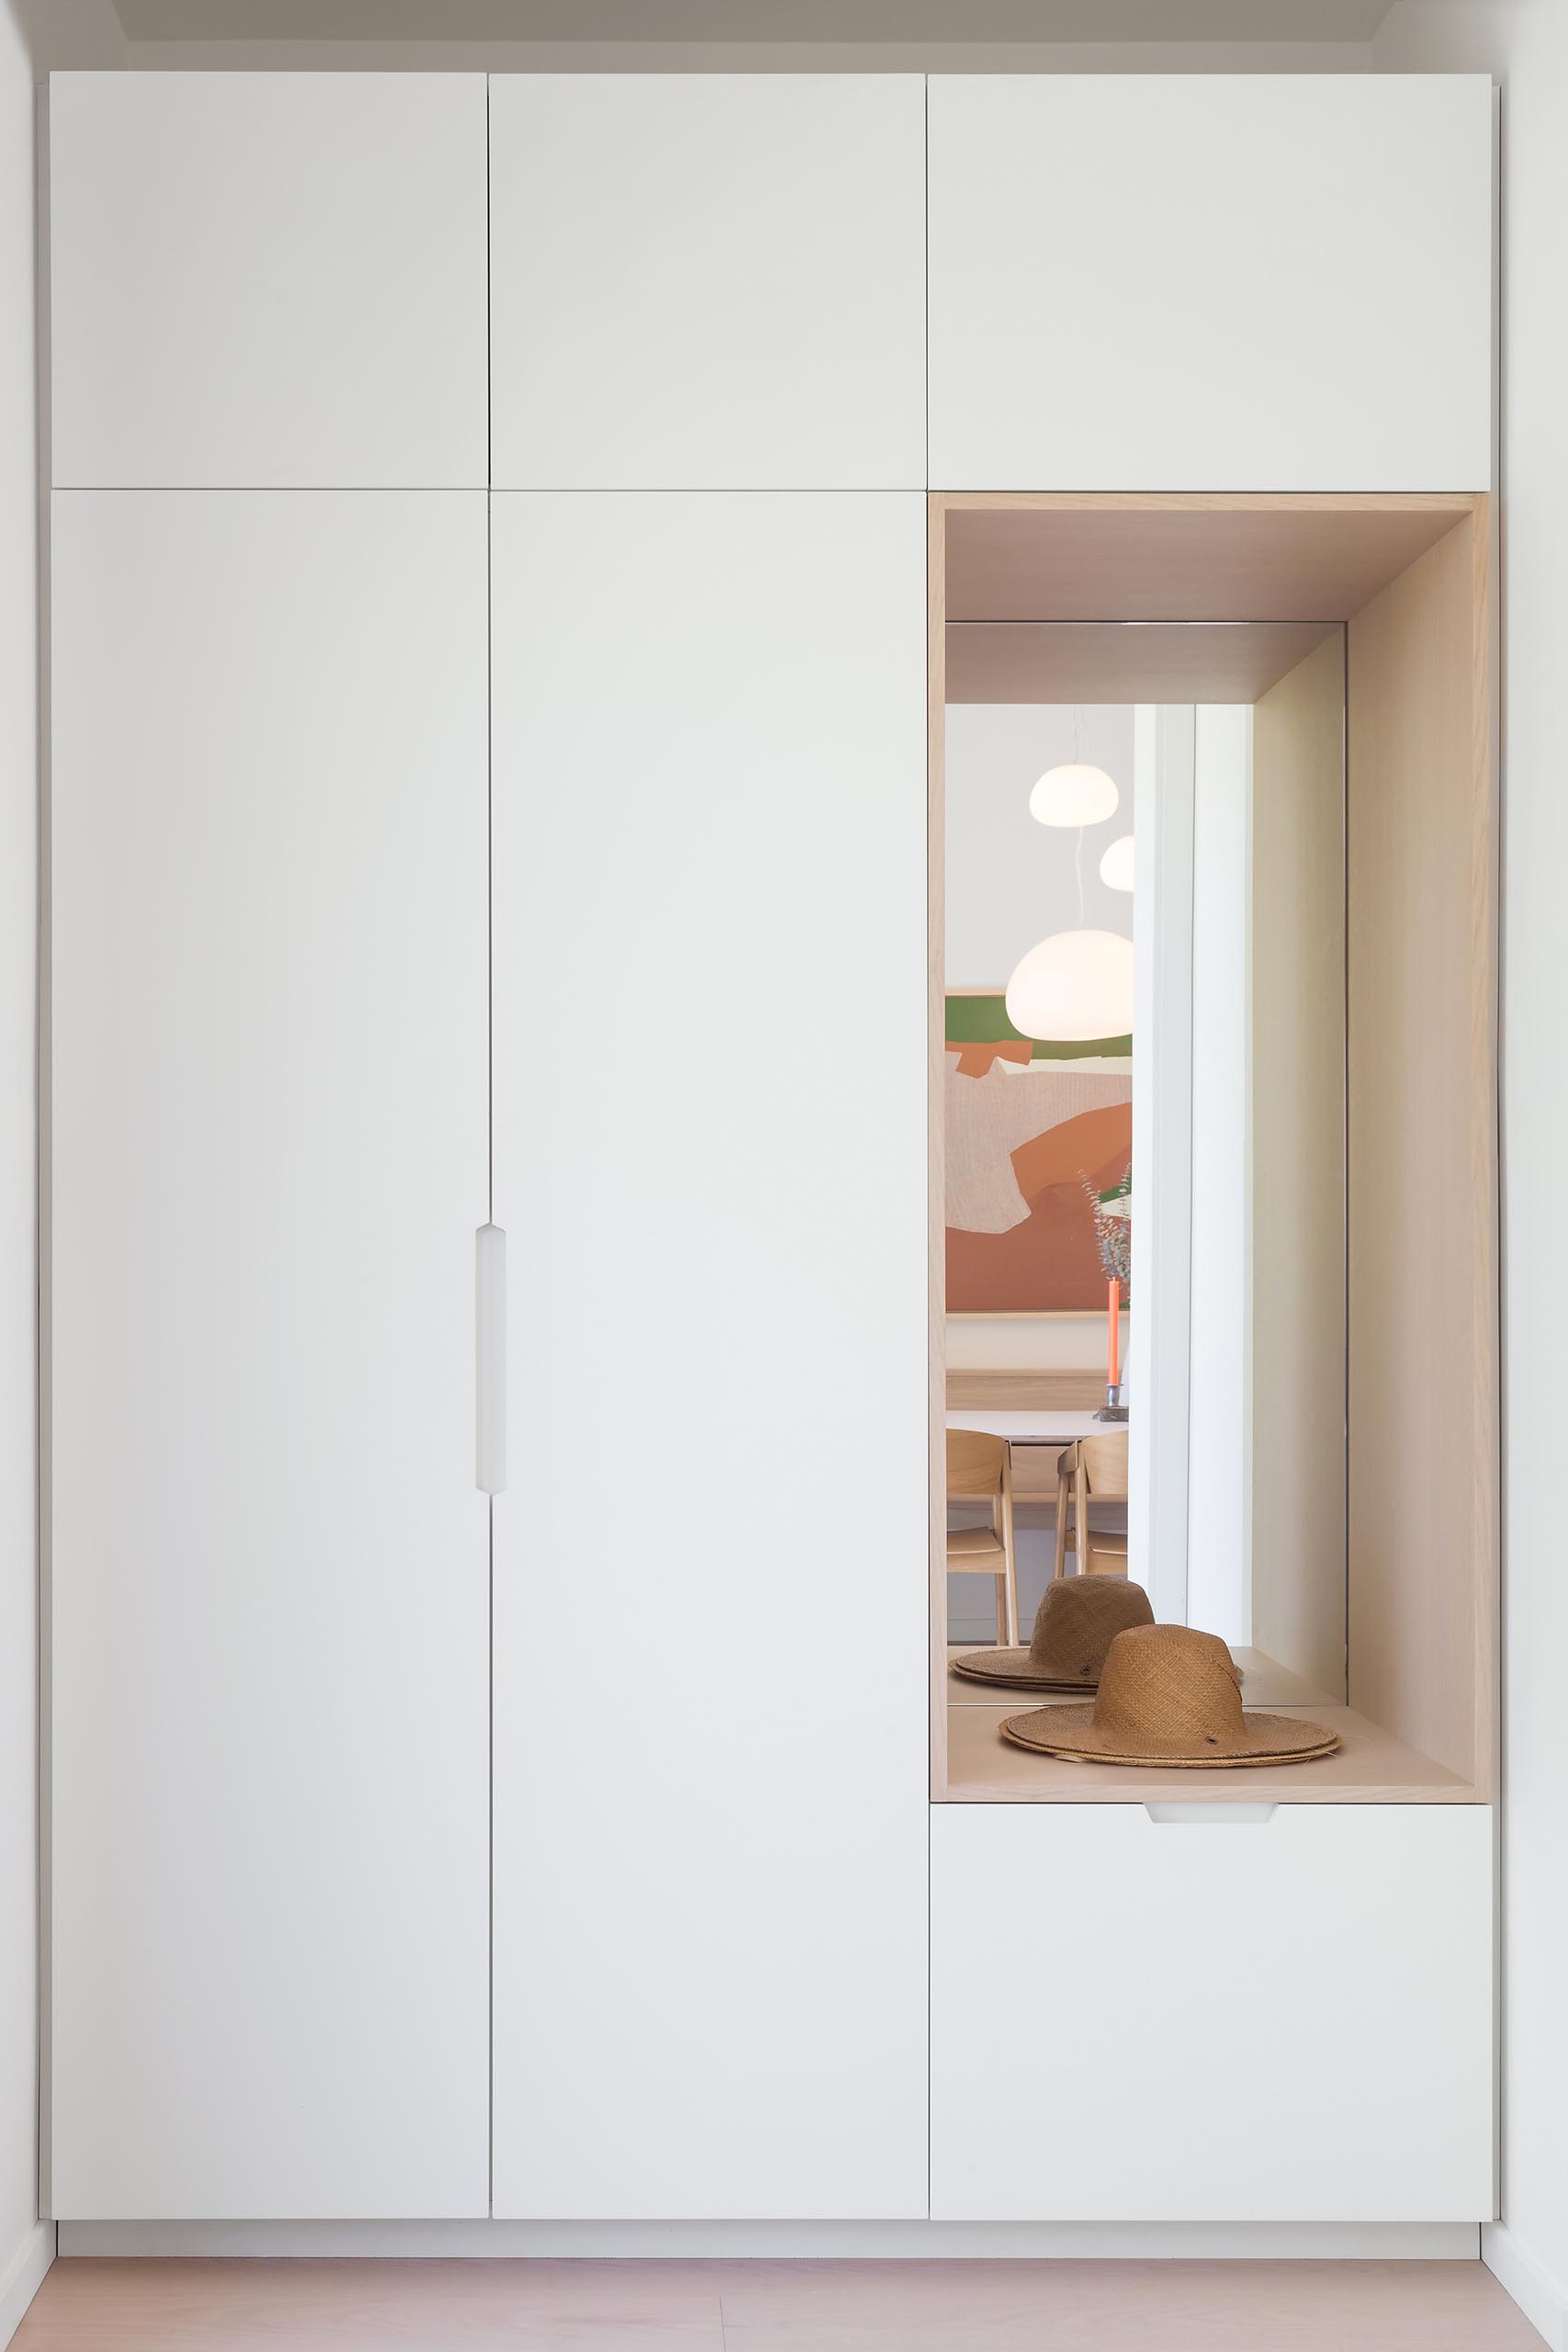 This modern entryway showcases Ash wood floors and a closet with a lacquered white finish and a small bench with a mirror.